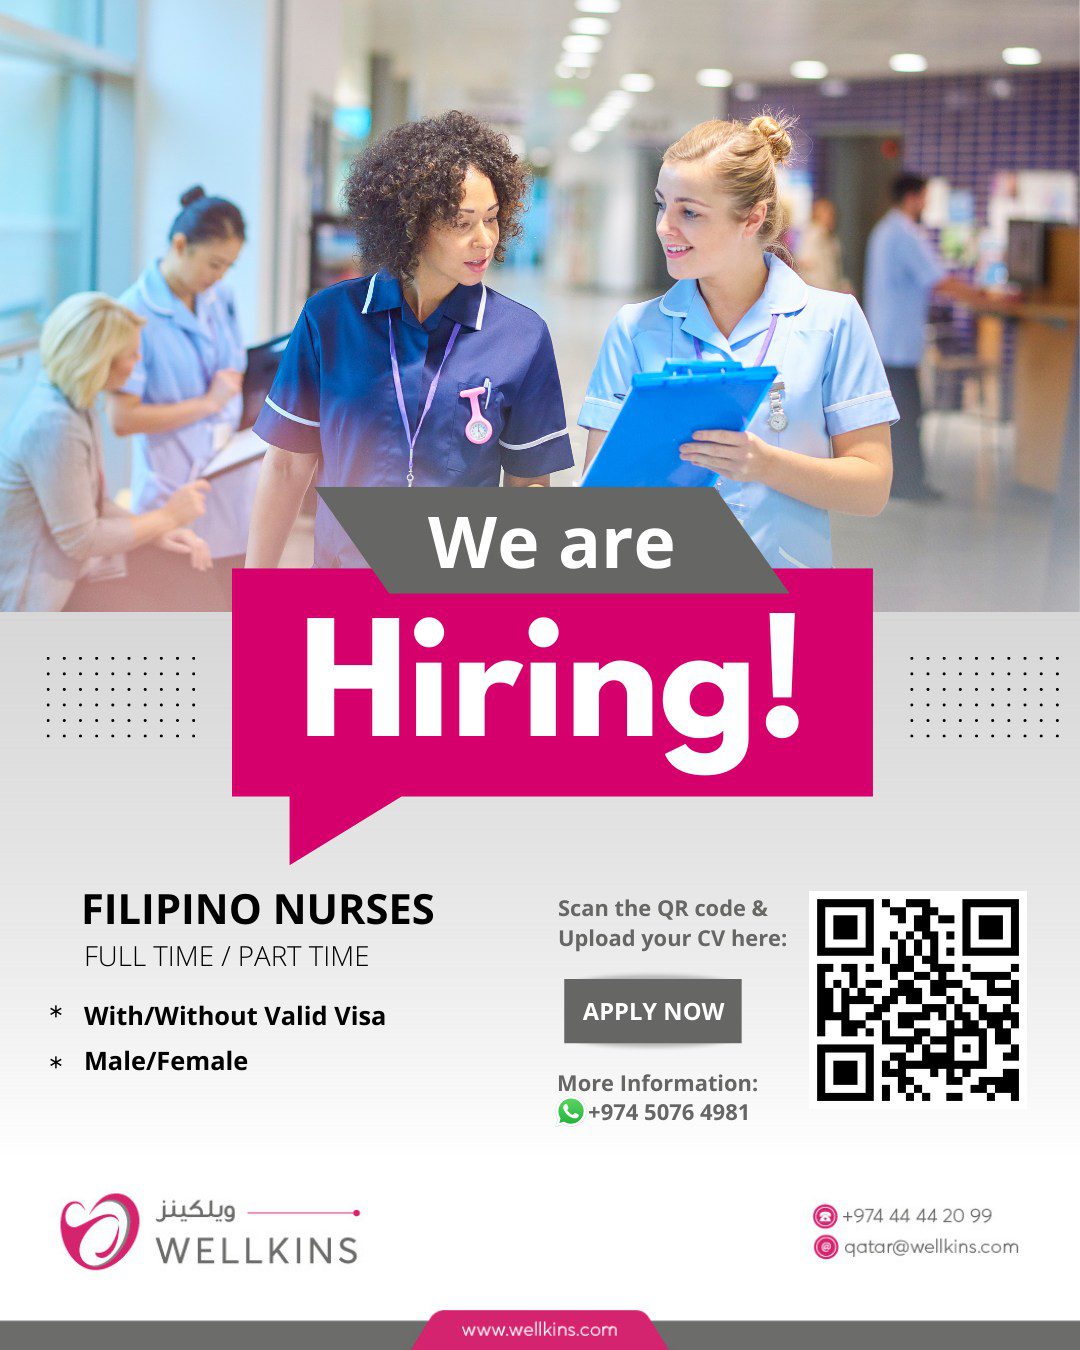 We are Hiring! Filipino Nurses, with/without a valid visa.
Apply now and be part of our growing family: https://bit.ly/applyatDSM
_______________________________
To learn more about #WELLKINSQATAR and our services, kindly visit our website www.wellkins.com
Helpline: 4444 2099
_______________________________
#Wellkinsqatar #wellkins #medicalcentre #Qatar2022